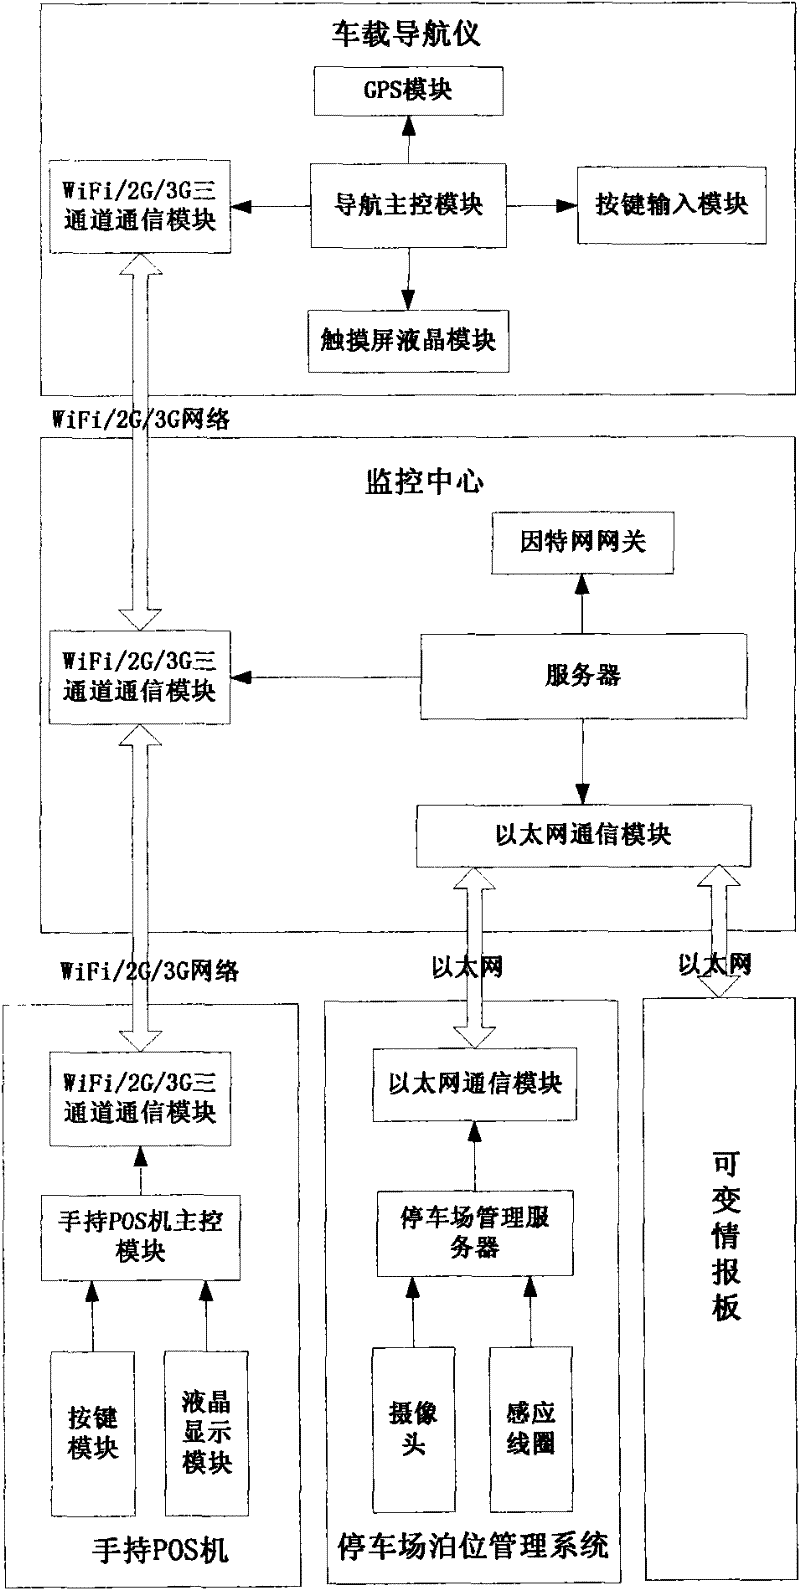 Parking position guiding system and method based on vehicle-mounted navigator